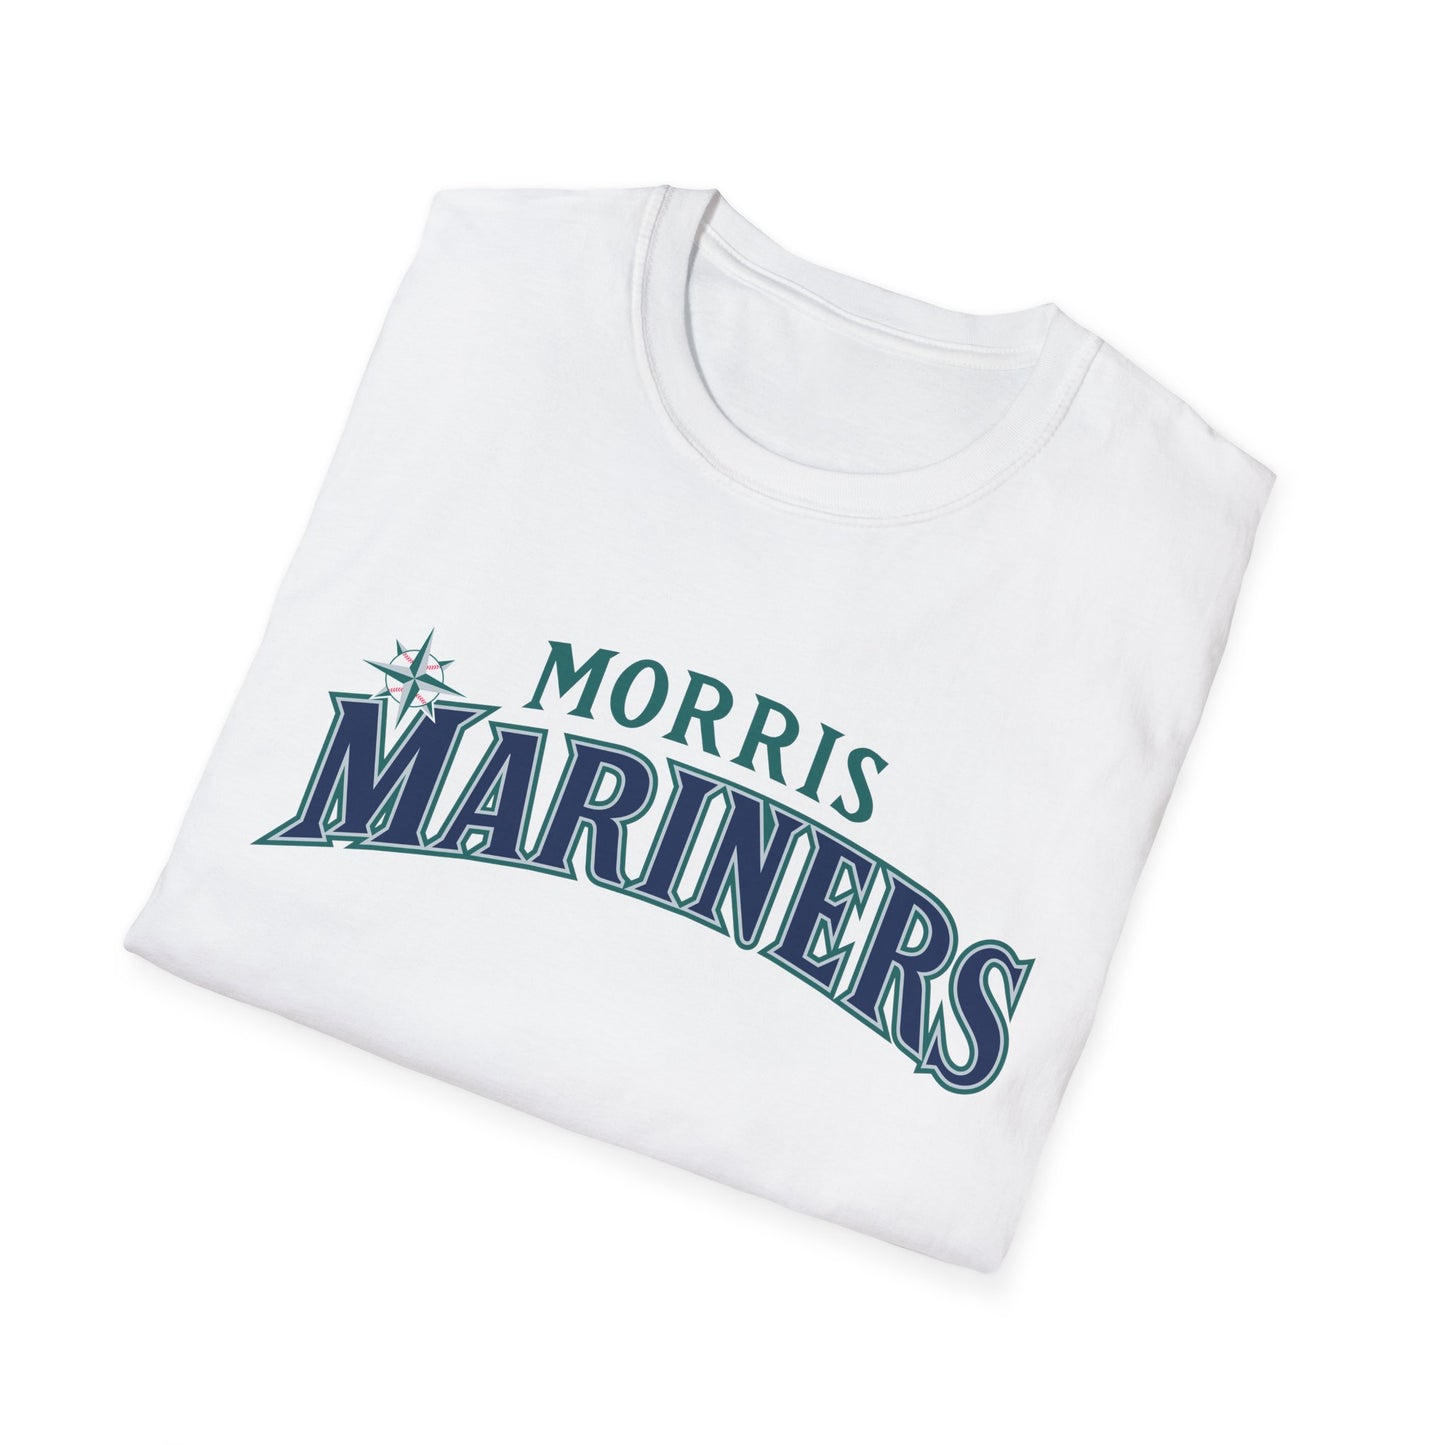 Morris Mariners Softstyle T-Shirt